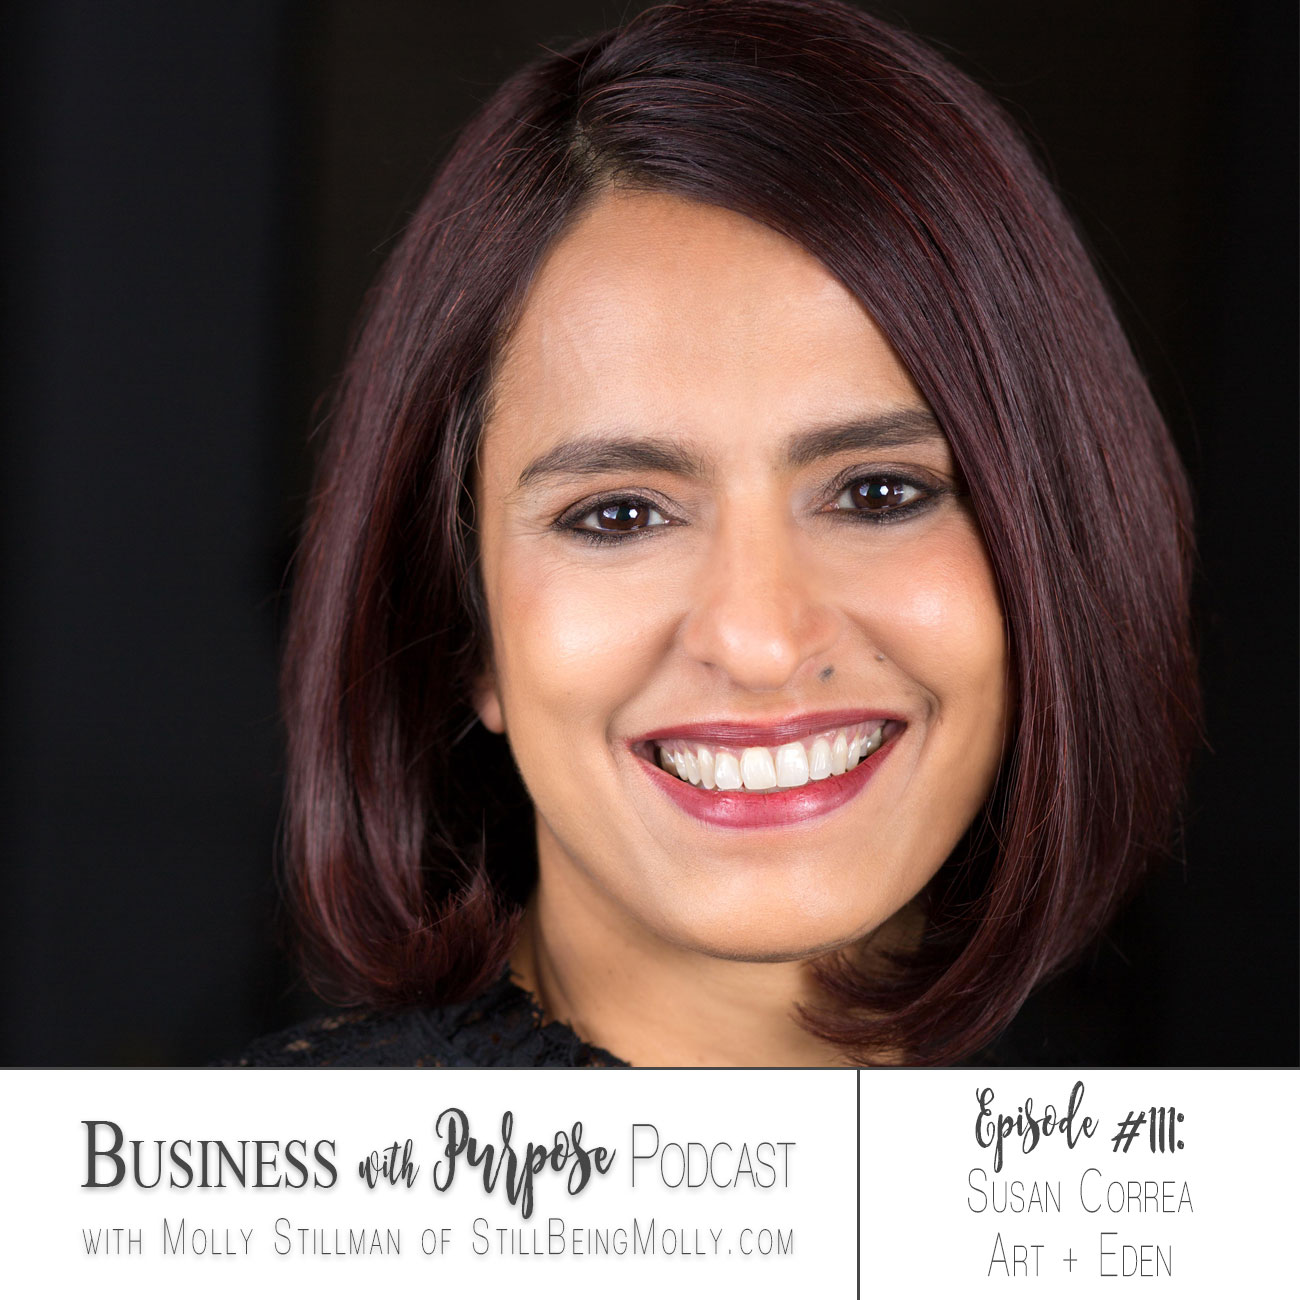 Business with Purpose Podcast EP 111: Susan Correa, Founder of Art + Eden